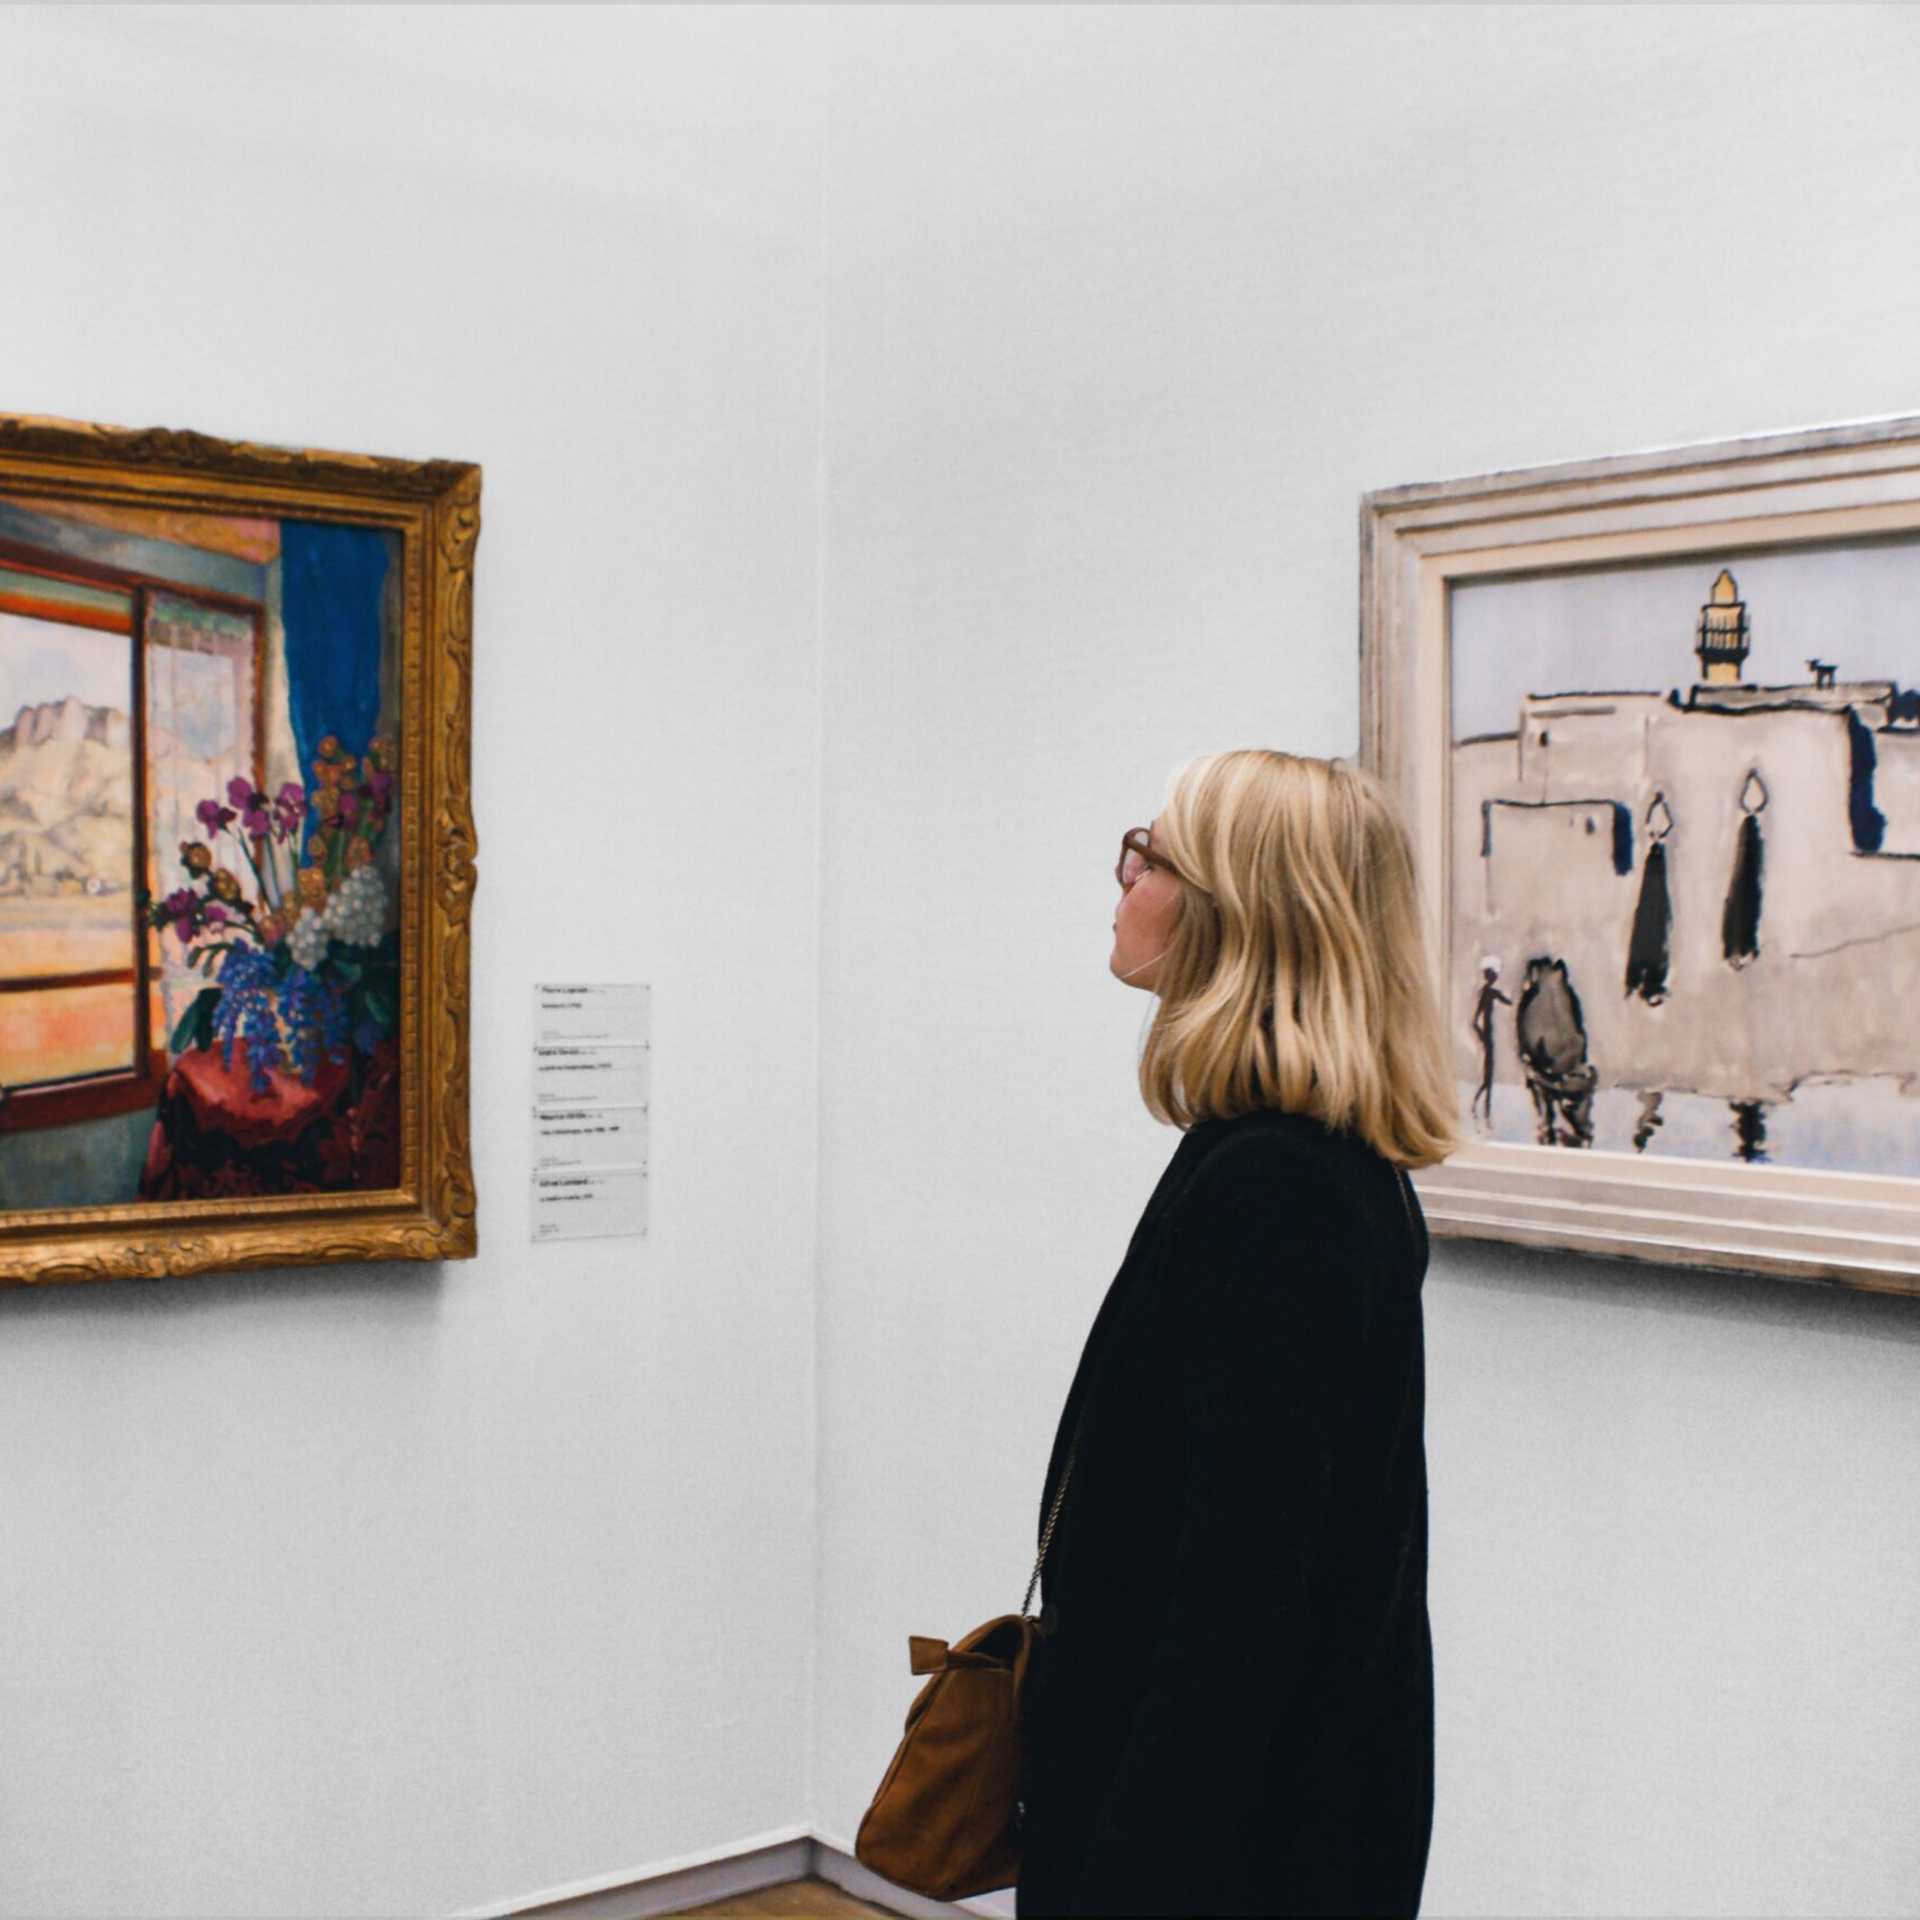 A woman looking at fine art in a museum.